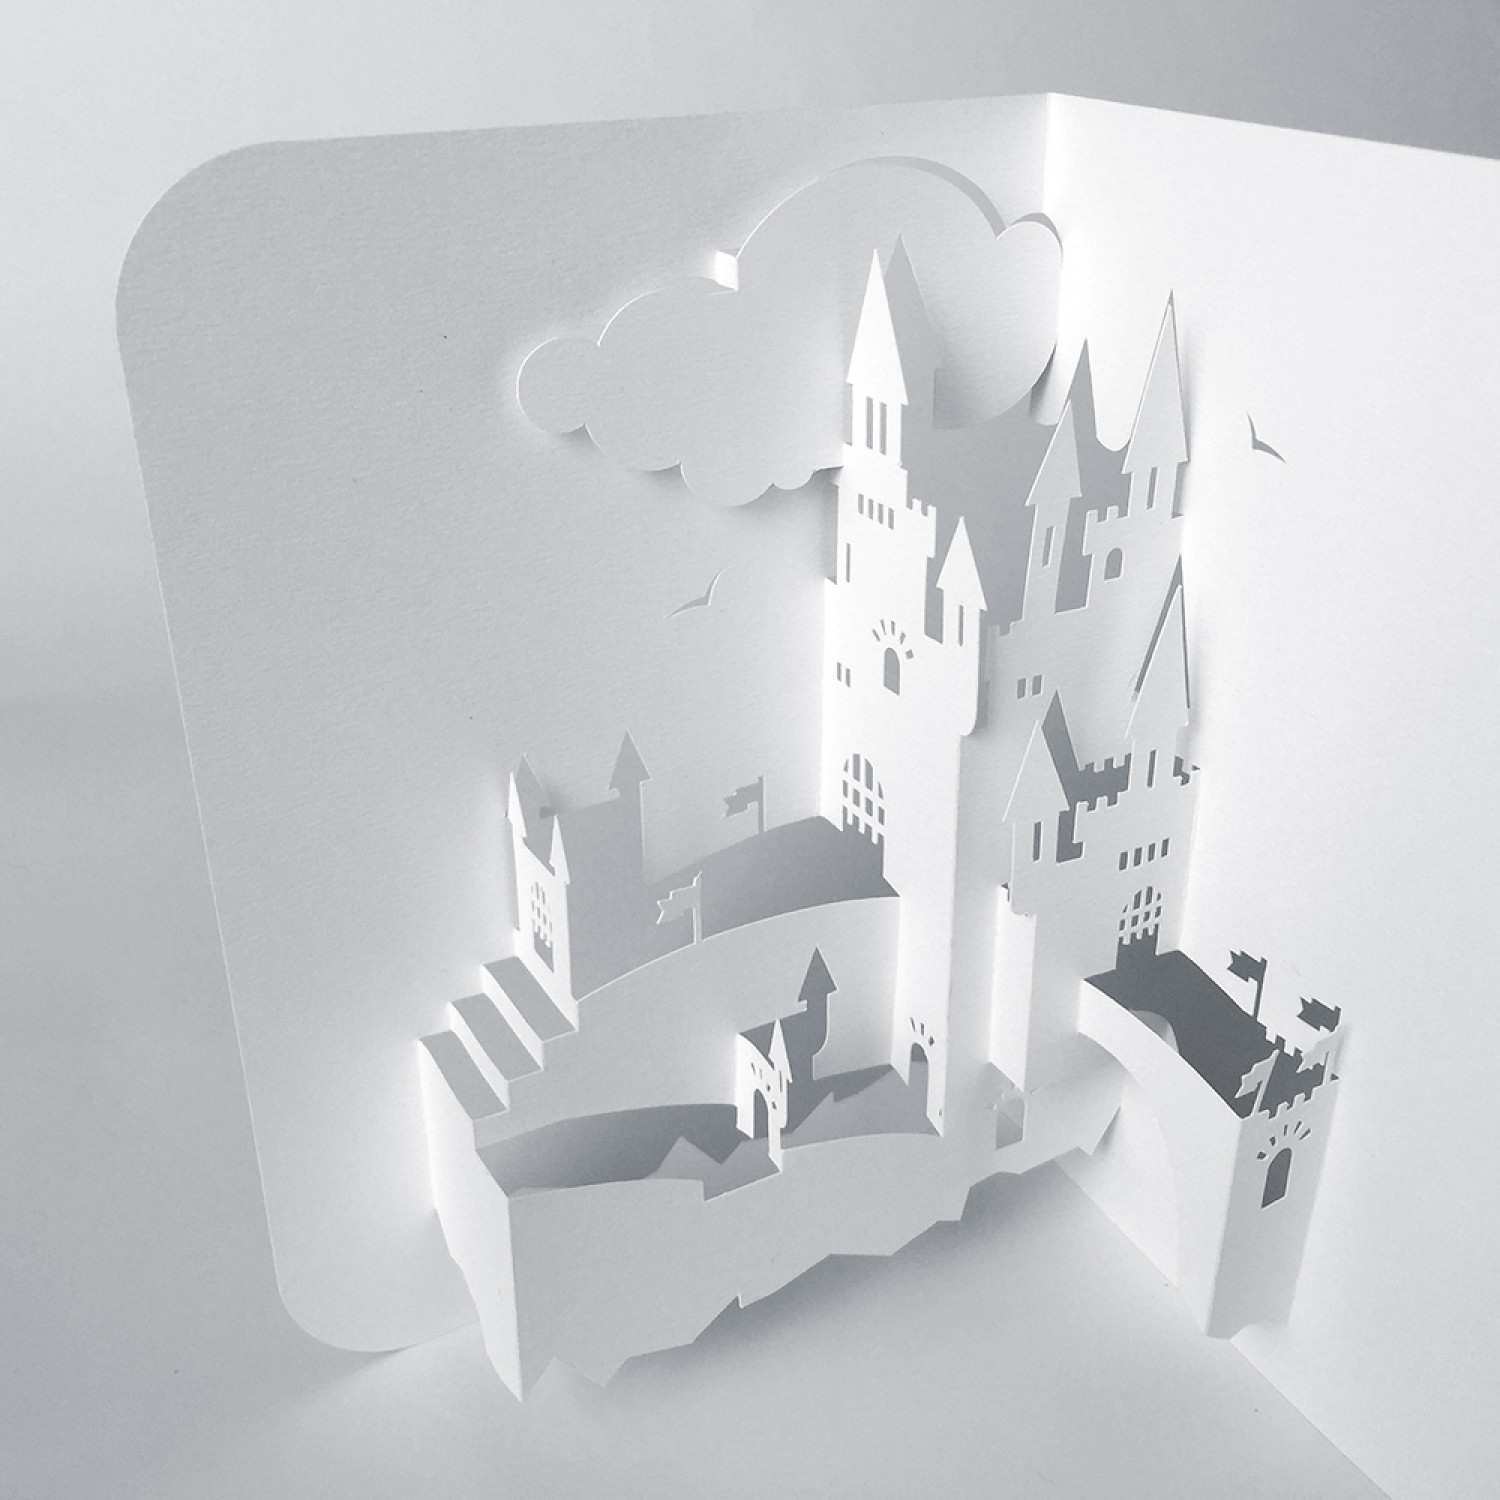 93 Free Pop Up Card Architecture Templates Templates for Pop Up Card Architecture Templates